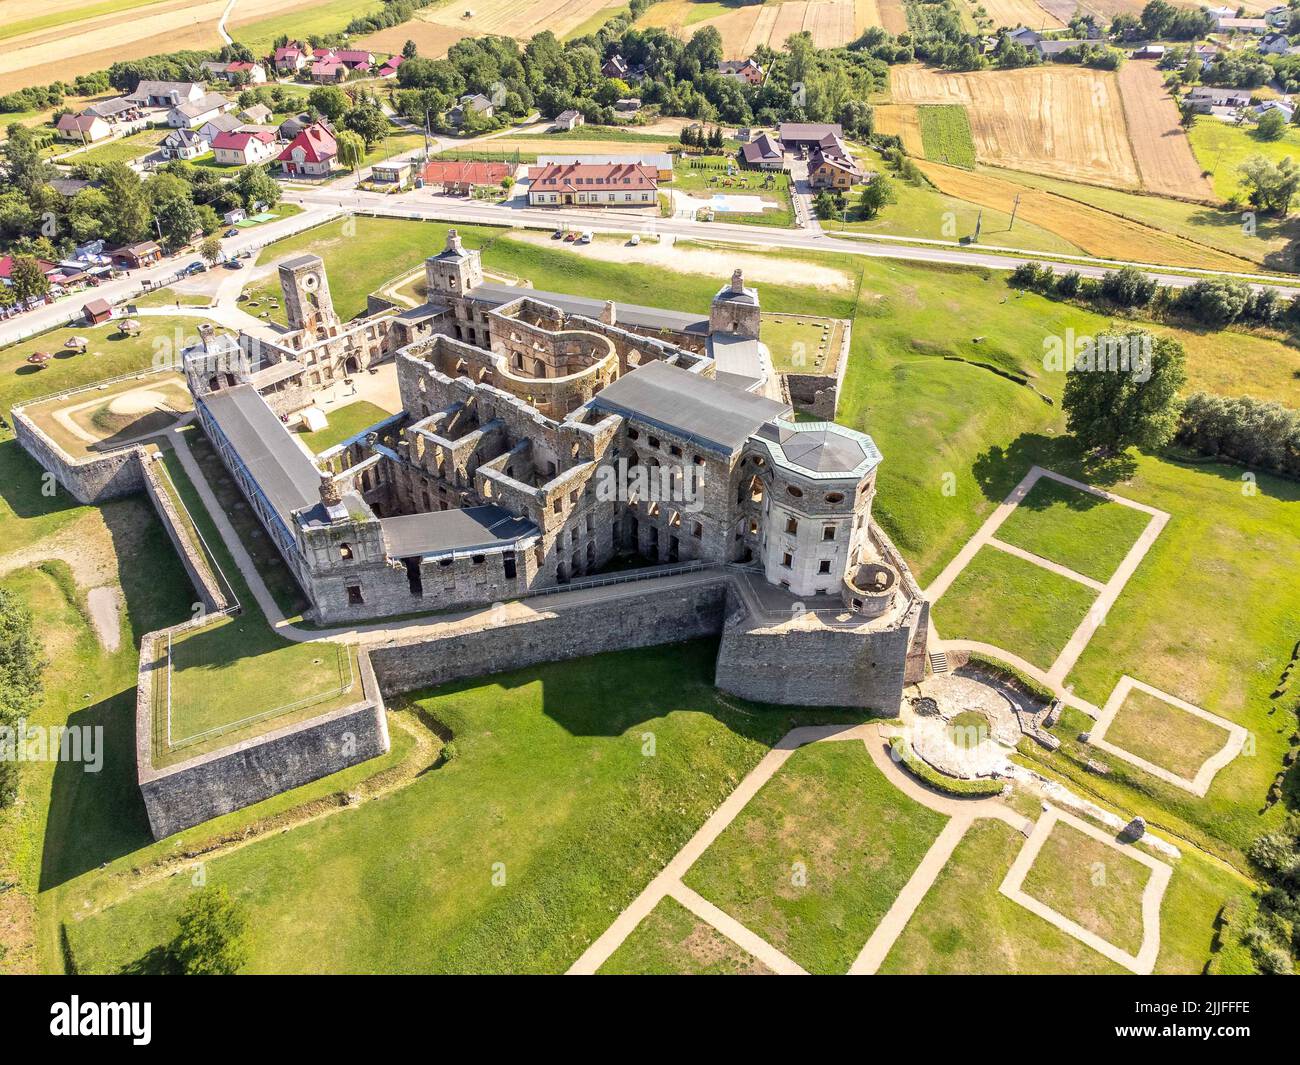 Krzyztopor Castle in Ujazd is a ruin full of magic and mystery lost among the fields and hills of Opatow Land, Poland Stock Photo